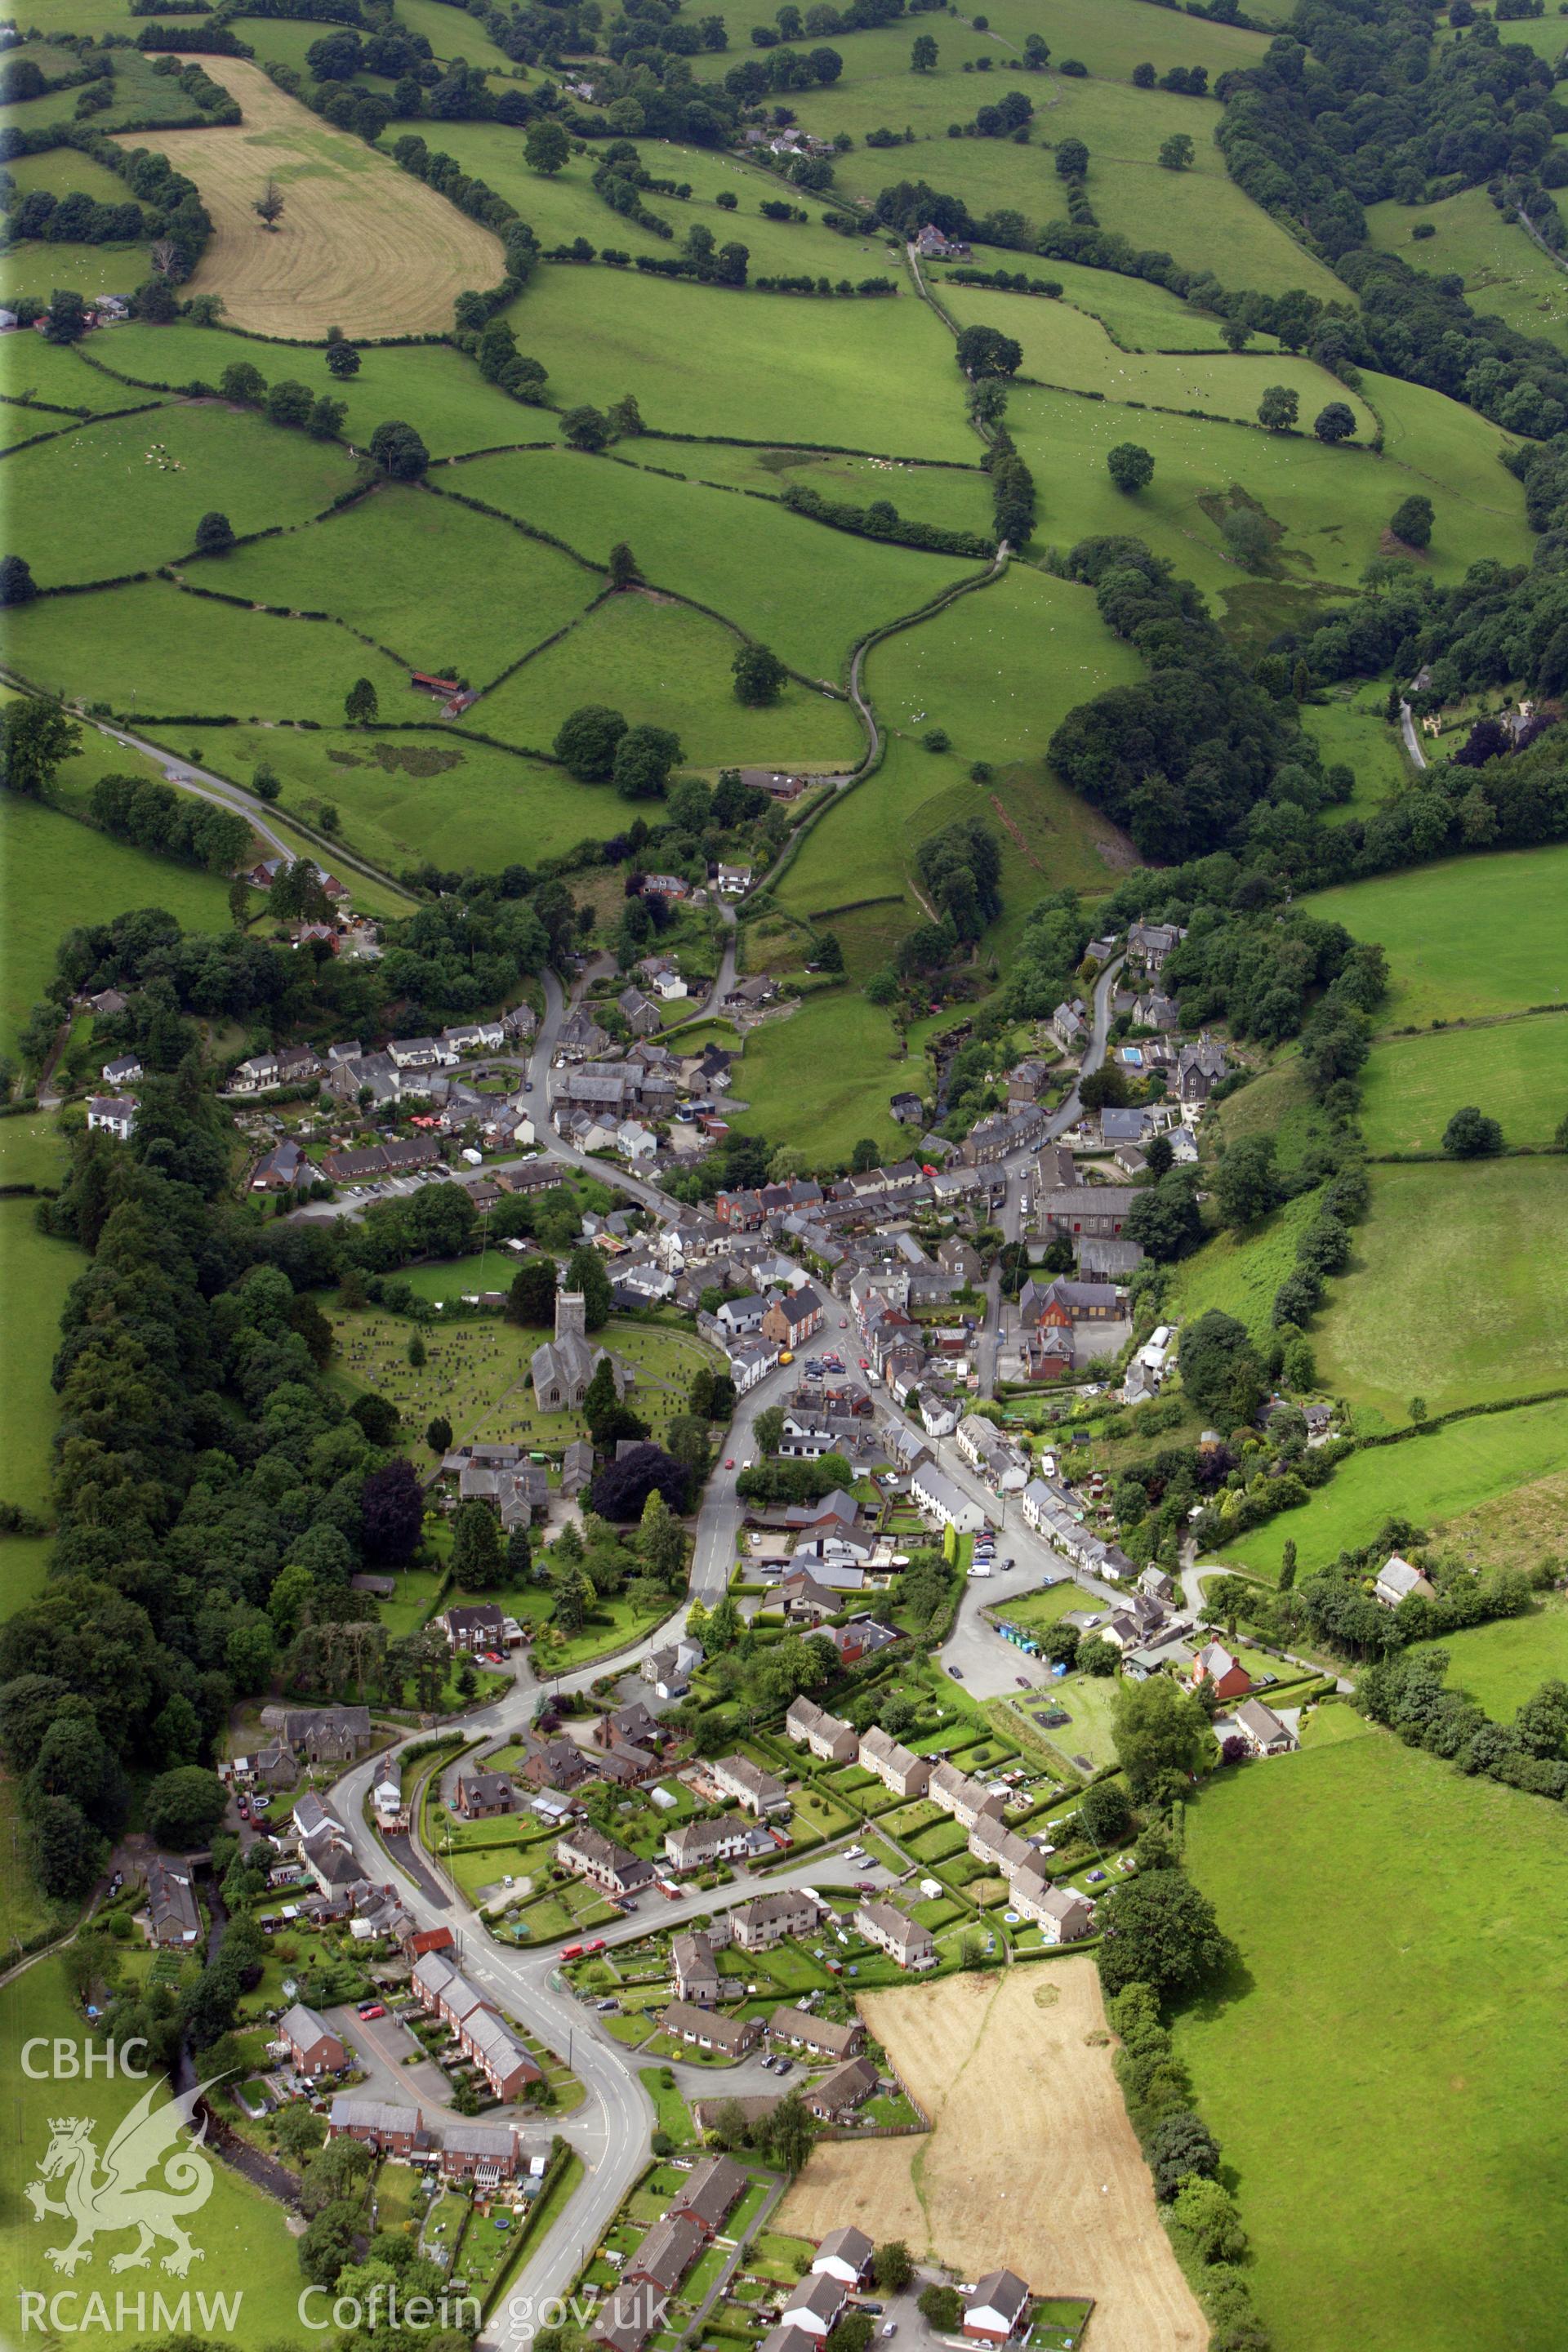 RCAHMW colour oblique aerial photograph of Llanrhaeadr Ym Mochnant in high view. Taken on 08 July 2009 by Toby Driver